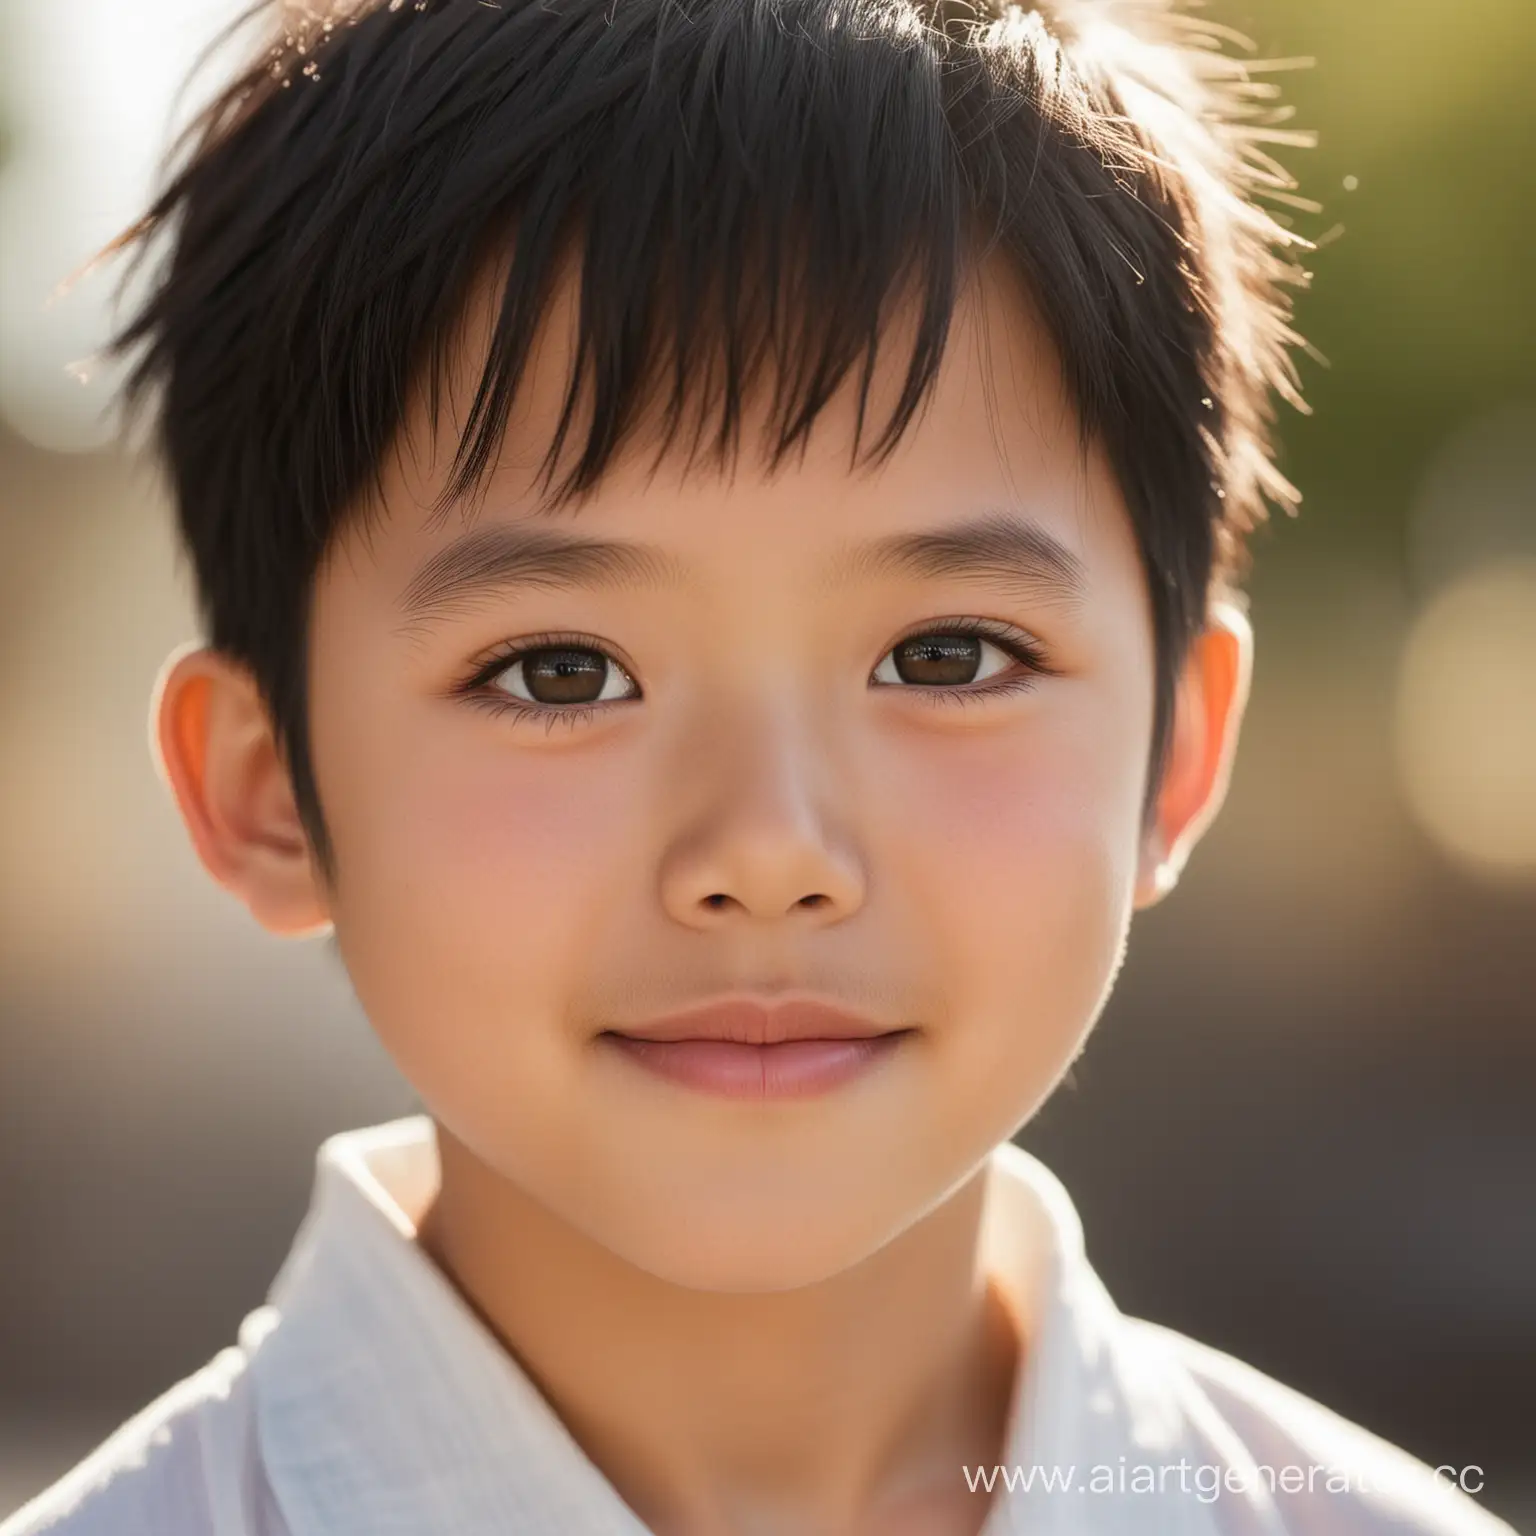 A handsome Chinese boy of about 5 or 6 years old, with an oval face, fair skin, short black hair, bright and spirited black eyes, a straight nose, and a slightly upturned mouth, exuding confidence in the sunlight.